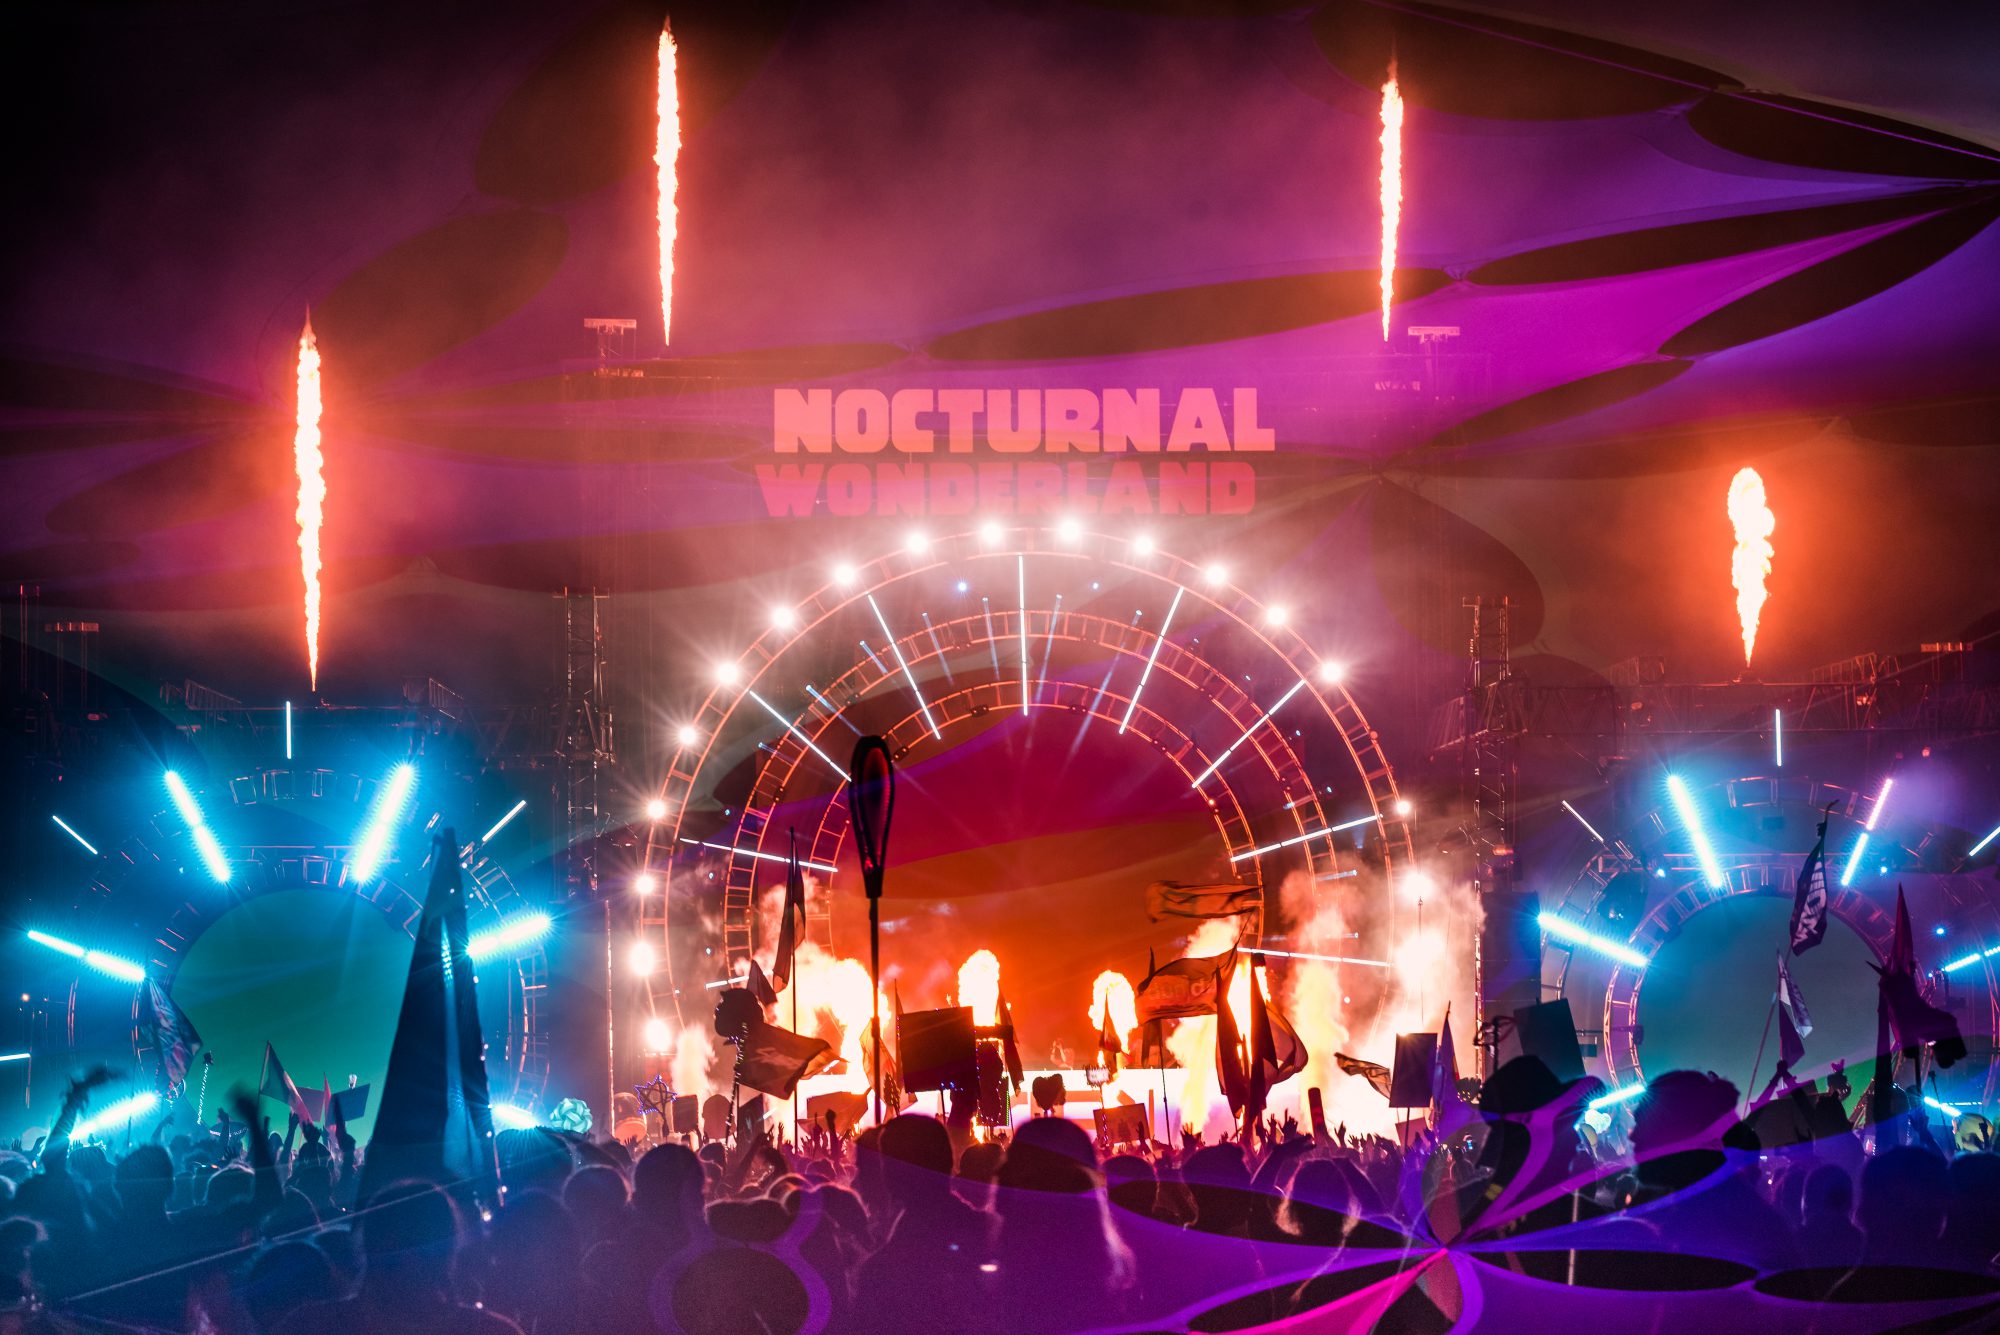 This weekend, Insomniac will be taking us all to Nocturnal Wonderland with ...